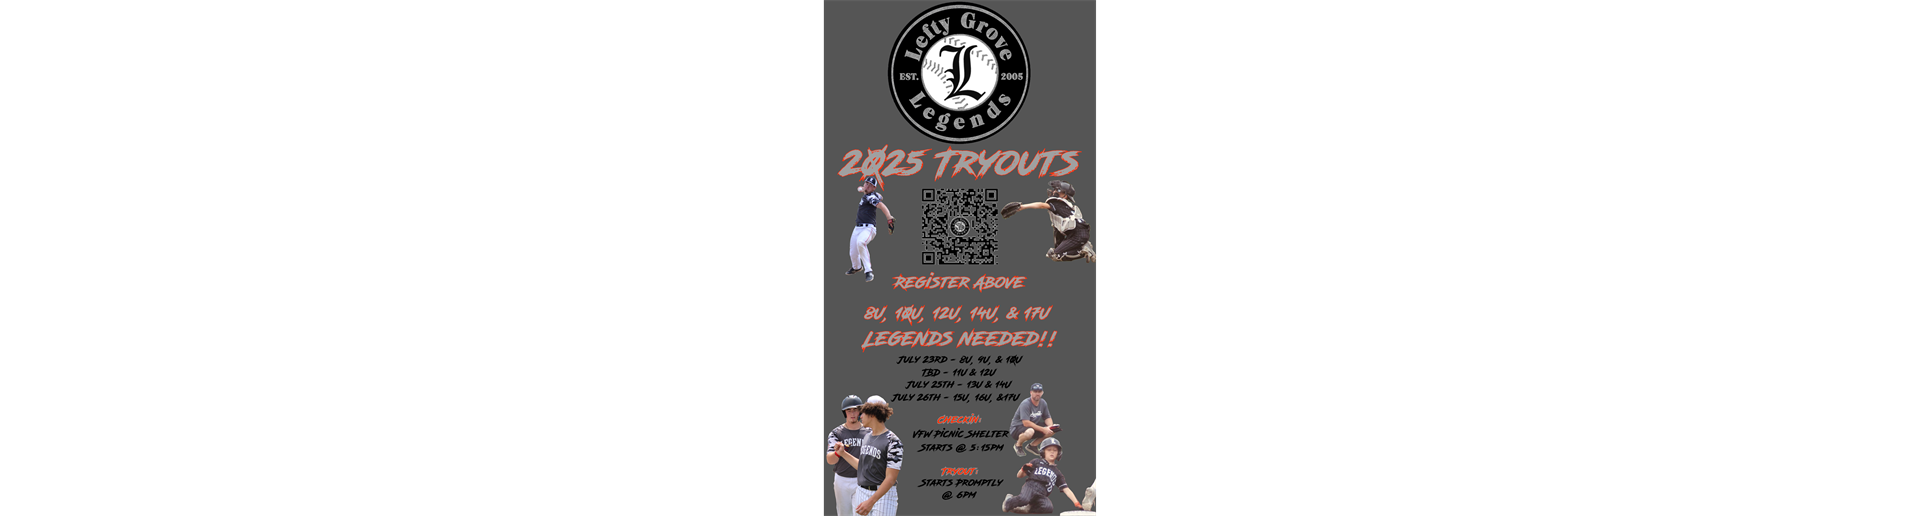 LEGENDS Tryouts for 2025